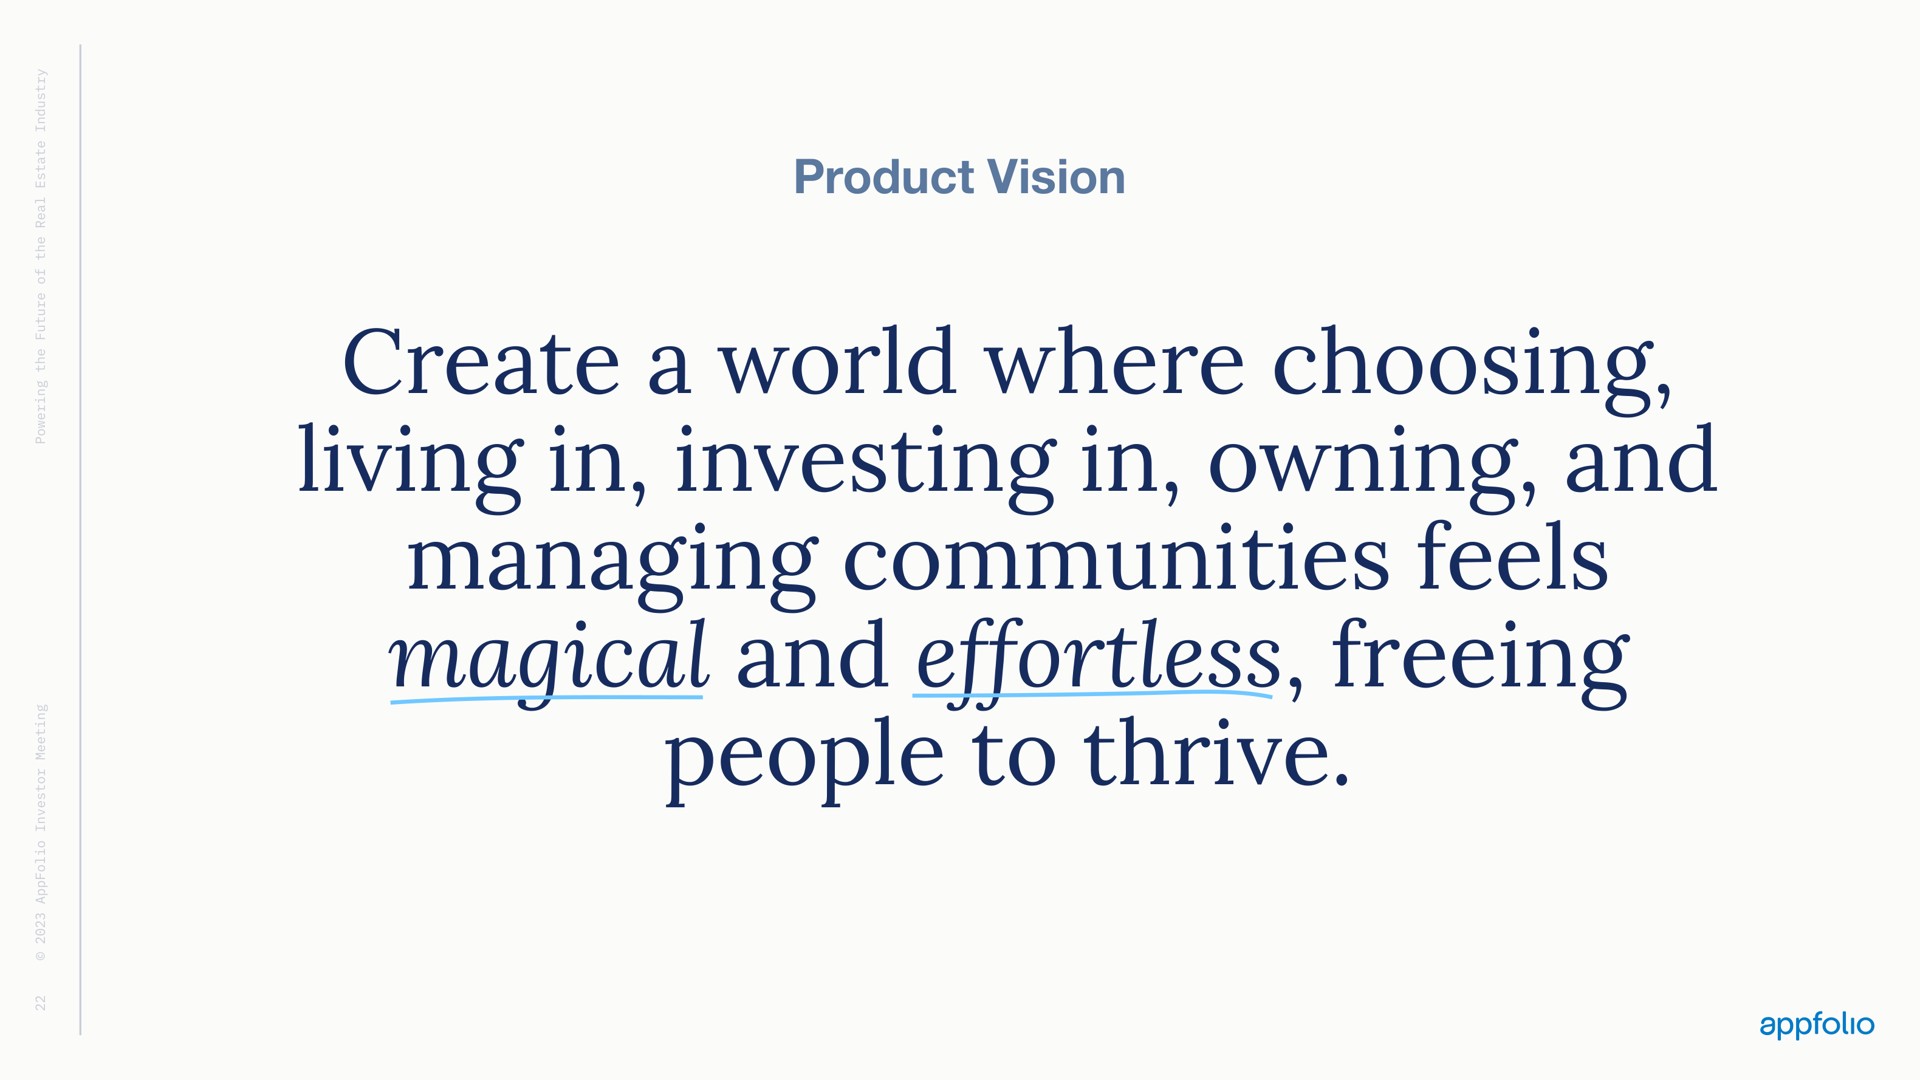 product vision create a world where choosing living in investing in owning and managing communities feels magical and effortless freeing people to thrive | AppFolio